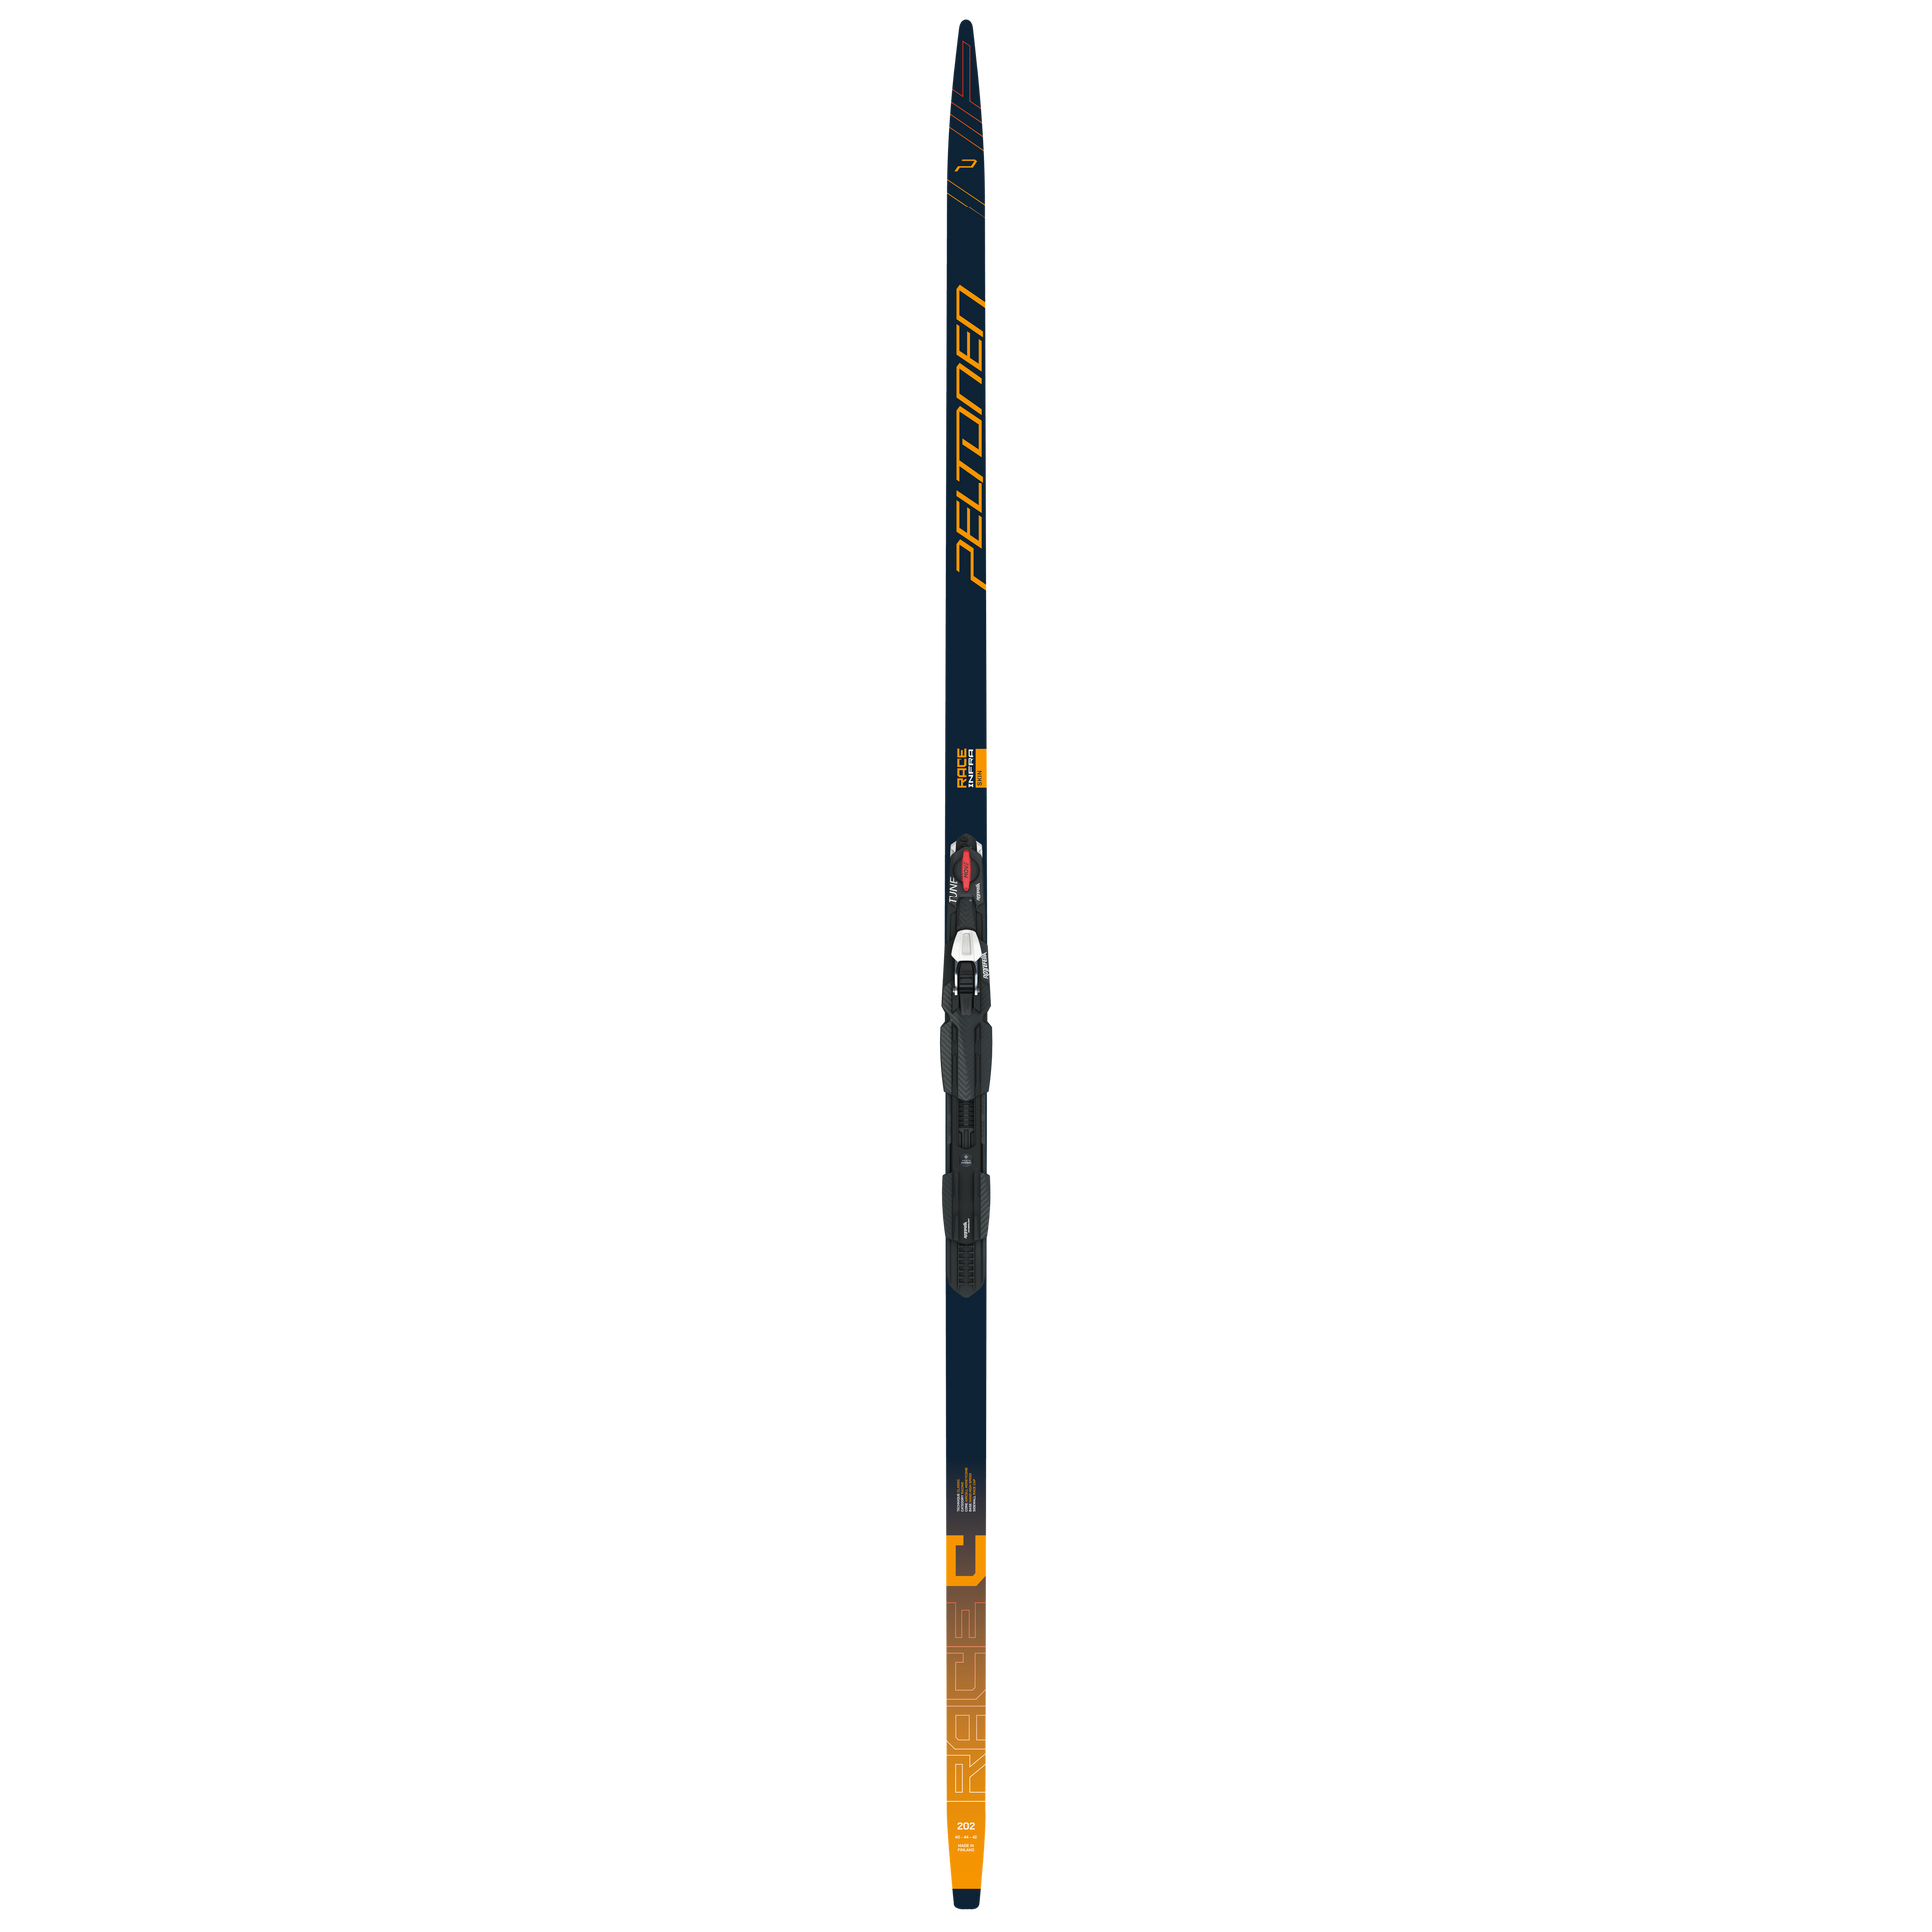 A product picture of the Peltonen INFRA C SKIN